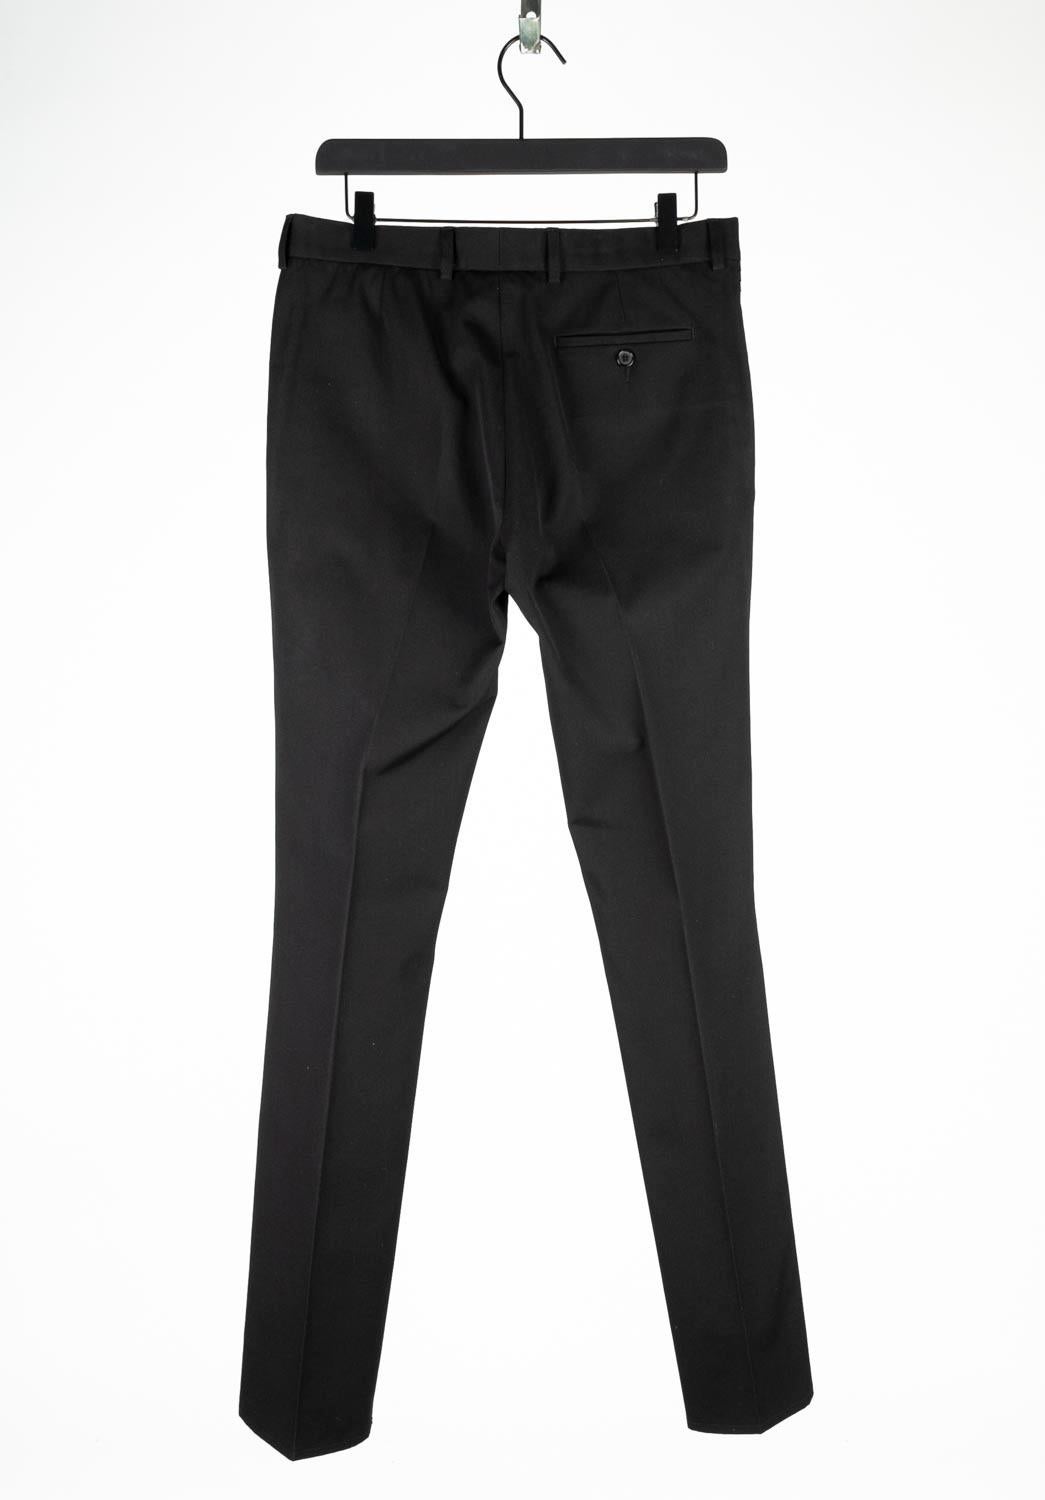 Dior Homme Men Trousers SS04 by Hedi Slimane Dress Pants, ITA Size 46 (M) In Excellent Condition For Sale In Kaunas, LT